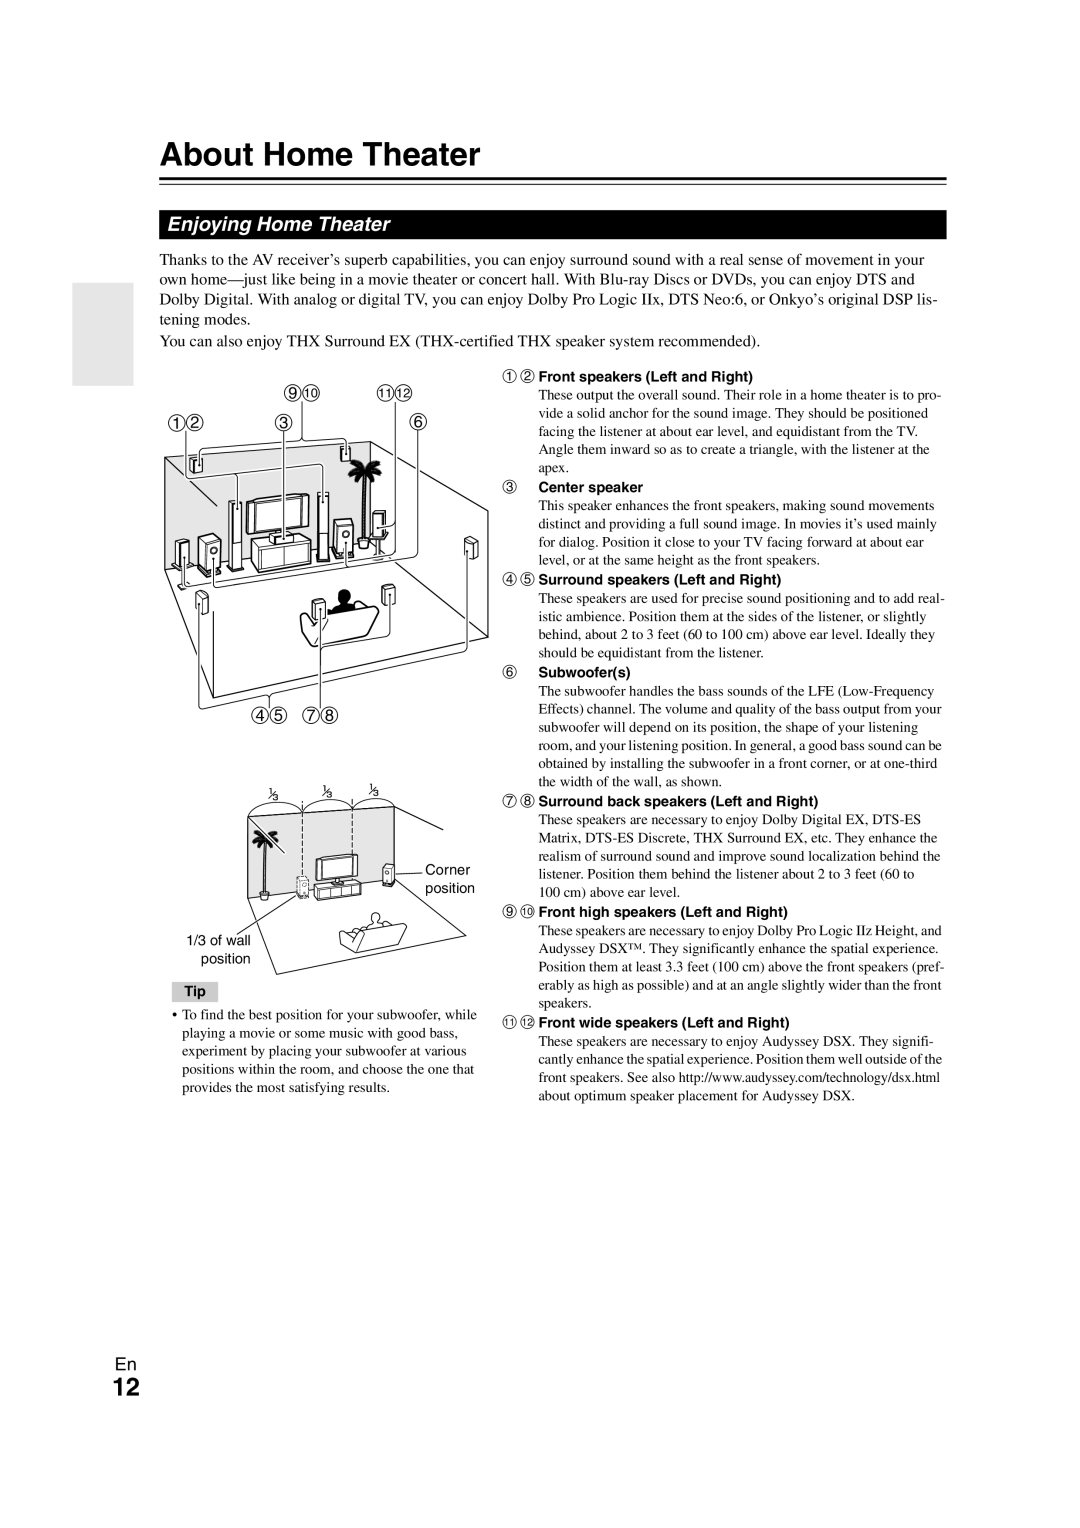 Onkyo TX-NR3008 instruction manual About Home Theater, Enjoying Home Theater, ij kl, de gh 